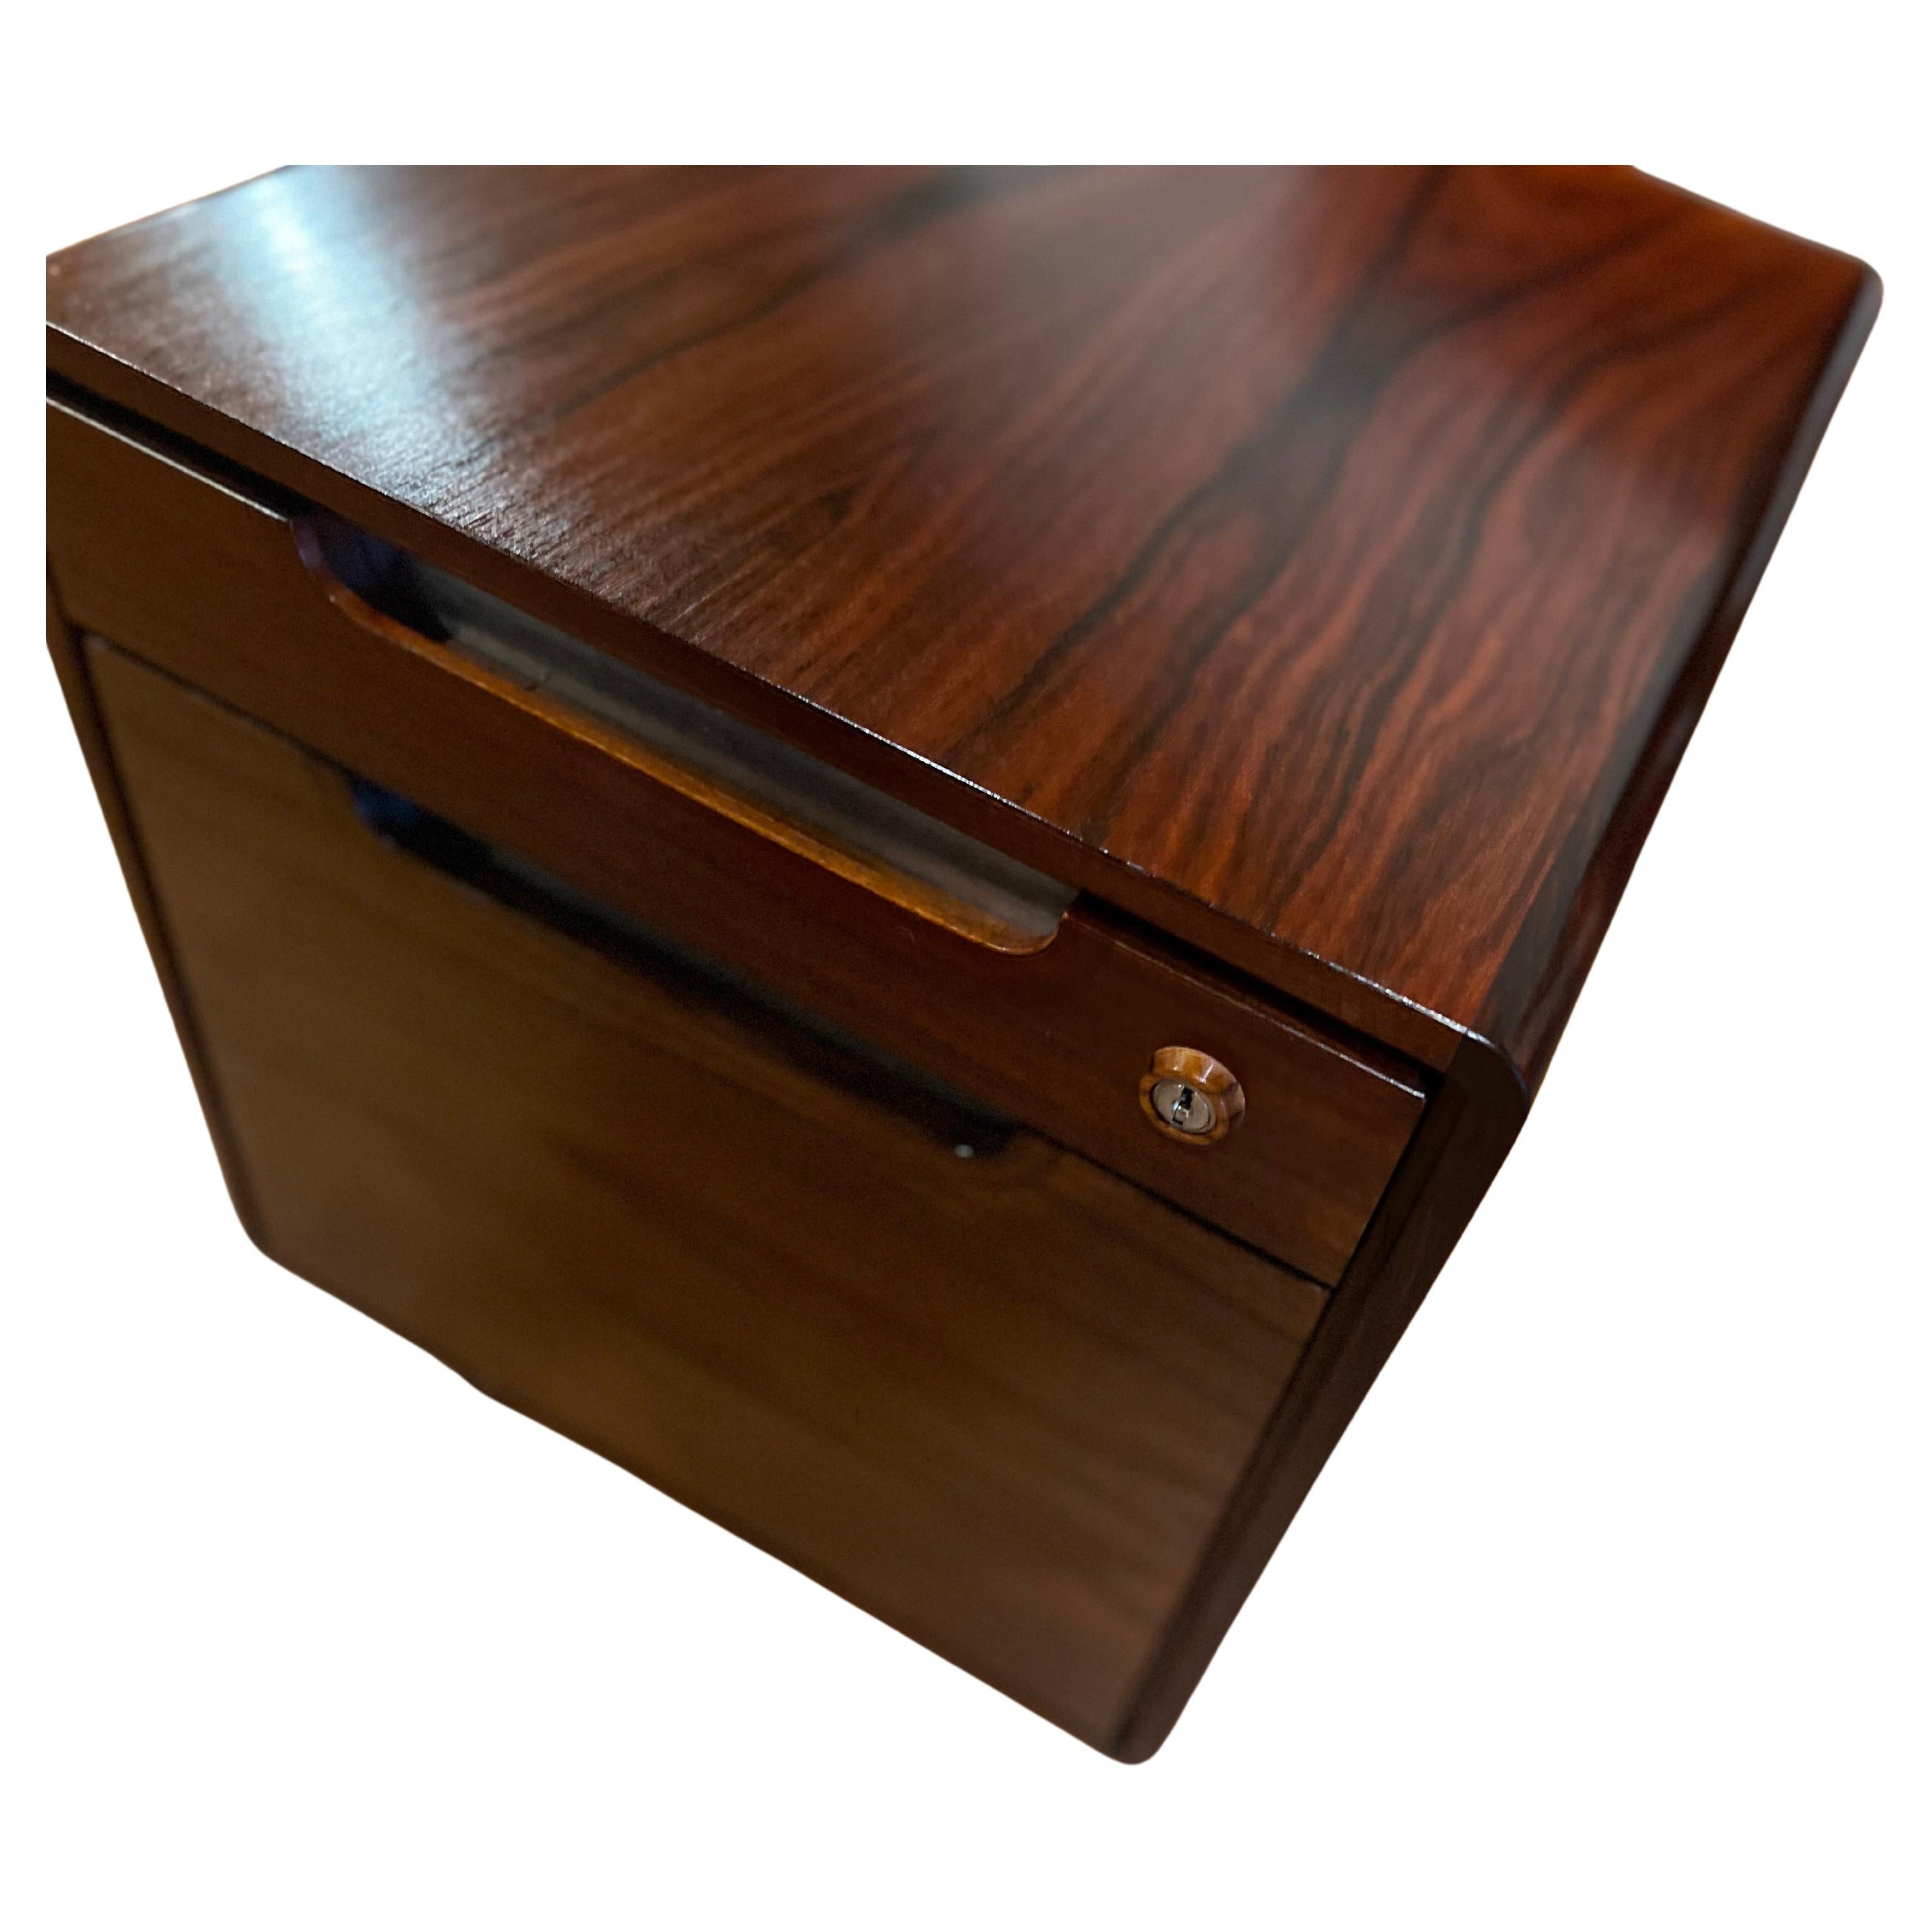 Gorgeous piece with incredible quality and craftsmanship circa 1980's rosewood case on casters, rolls beautifully the drawers slide like butter, and has a solid wood removable tray wrapped in leather, the key is missing, very heavy piece made in